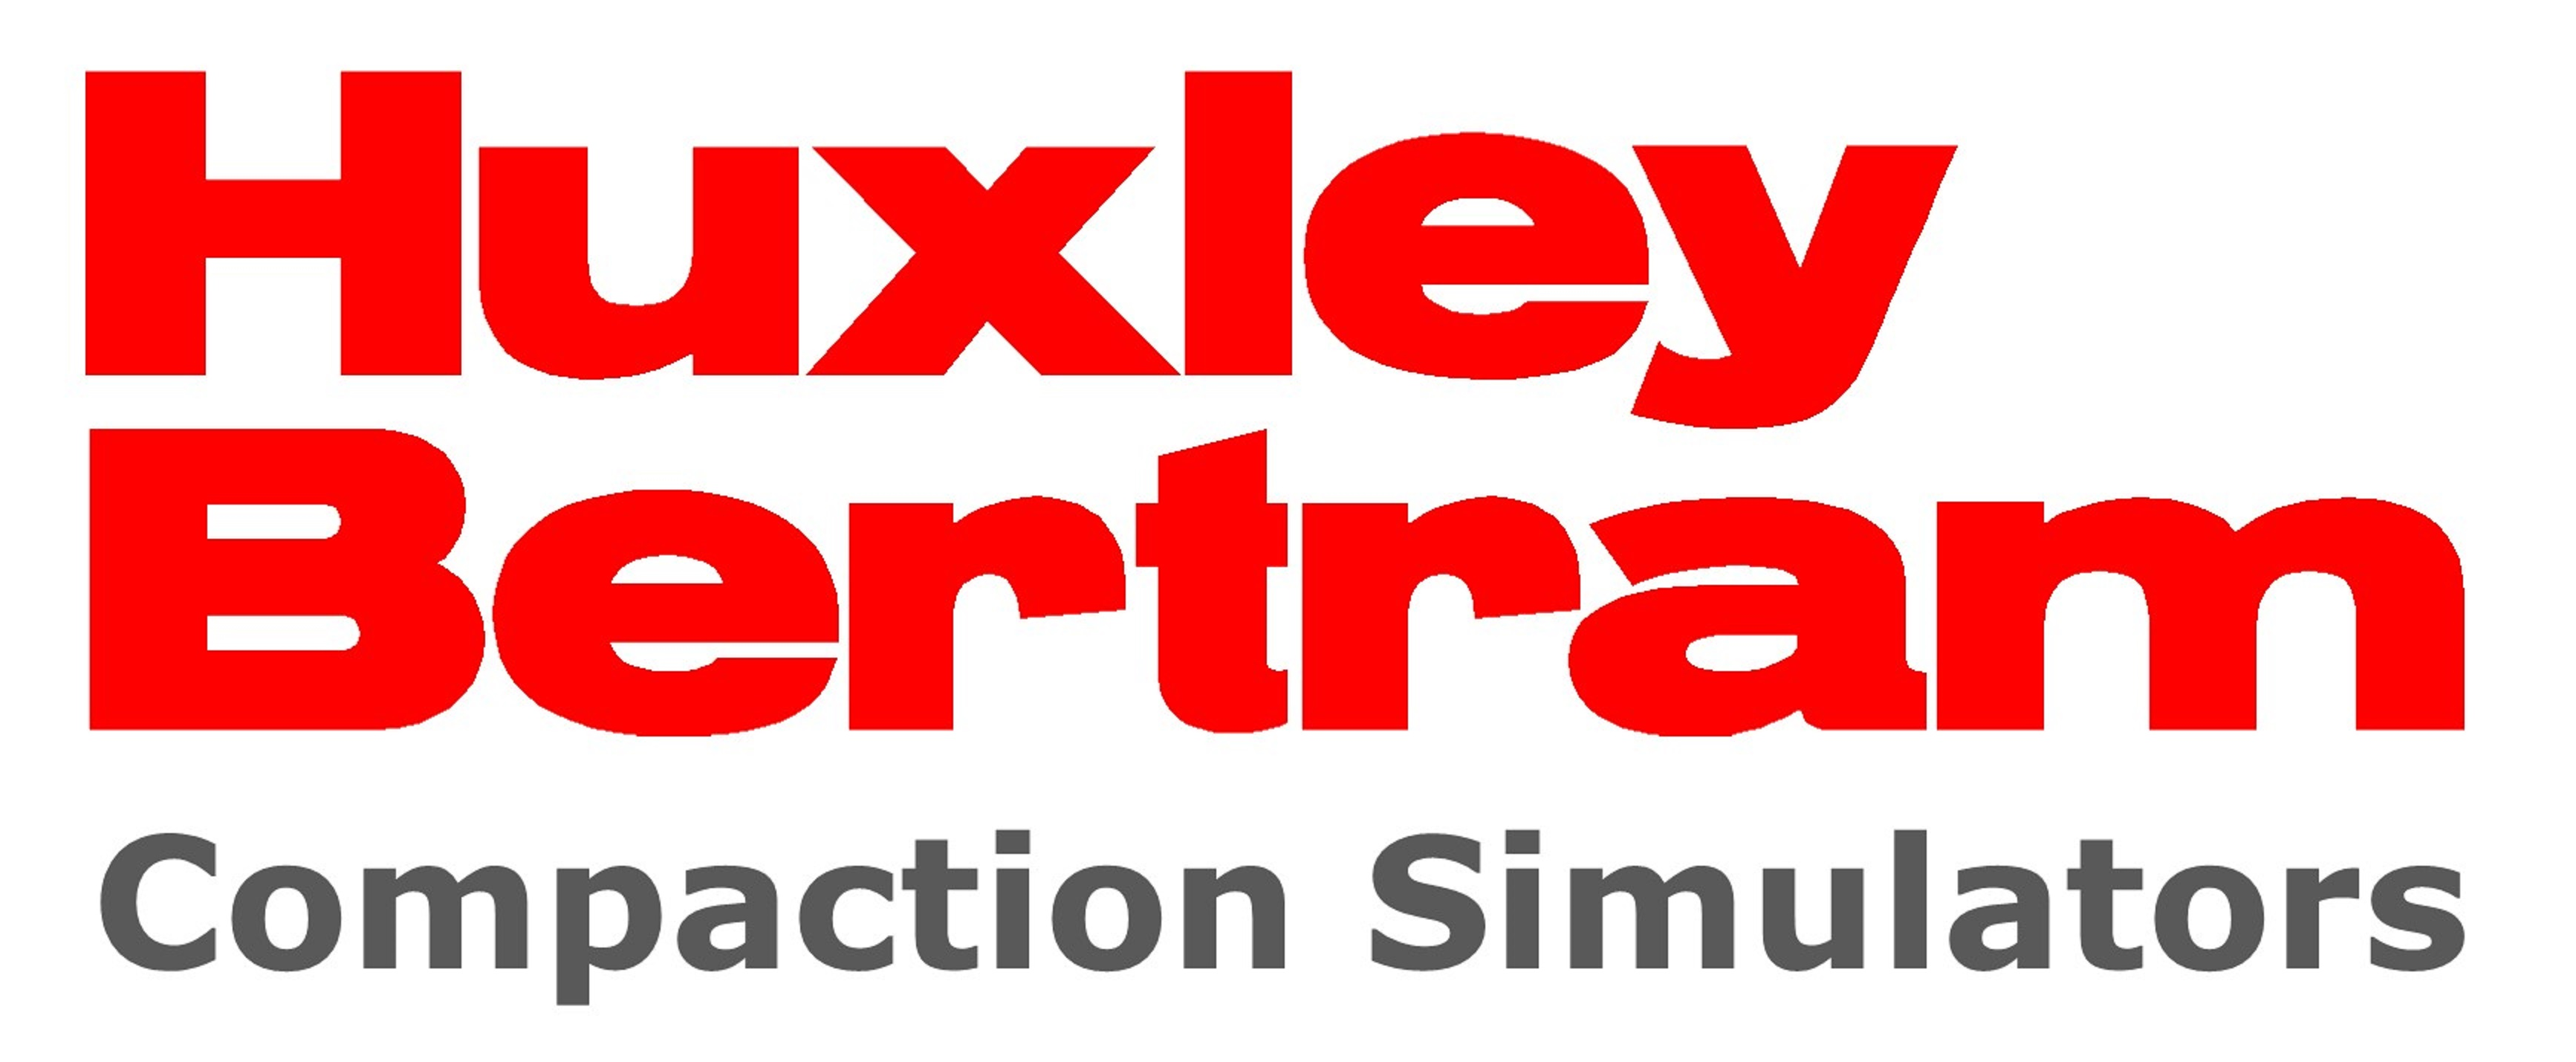 Automated tablet development from Huxley Bertram